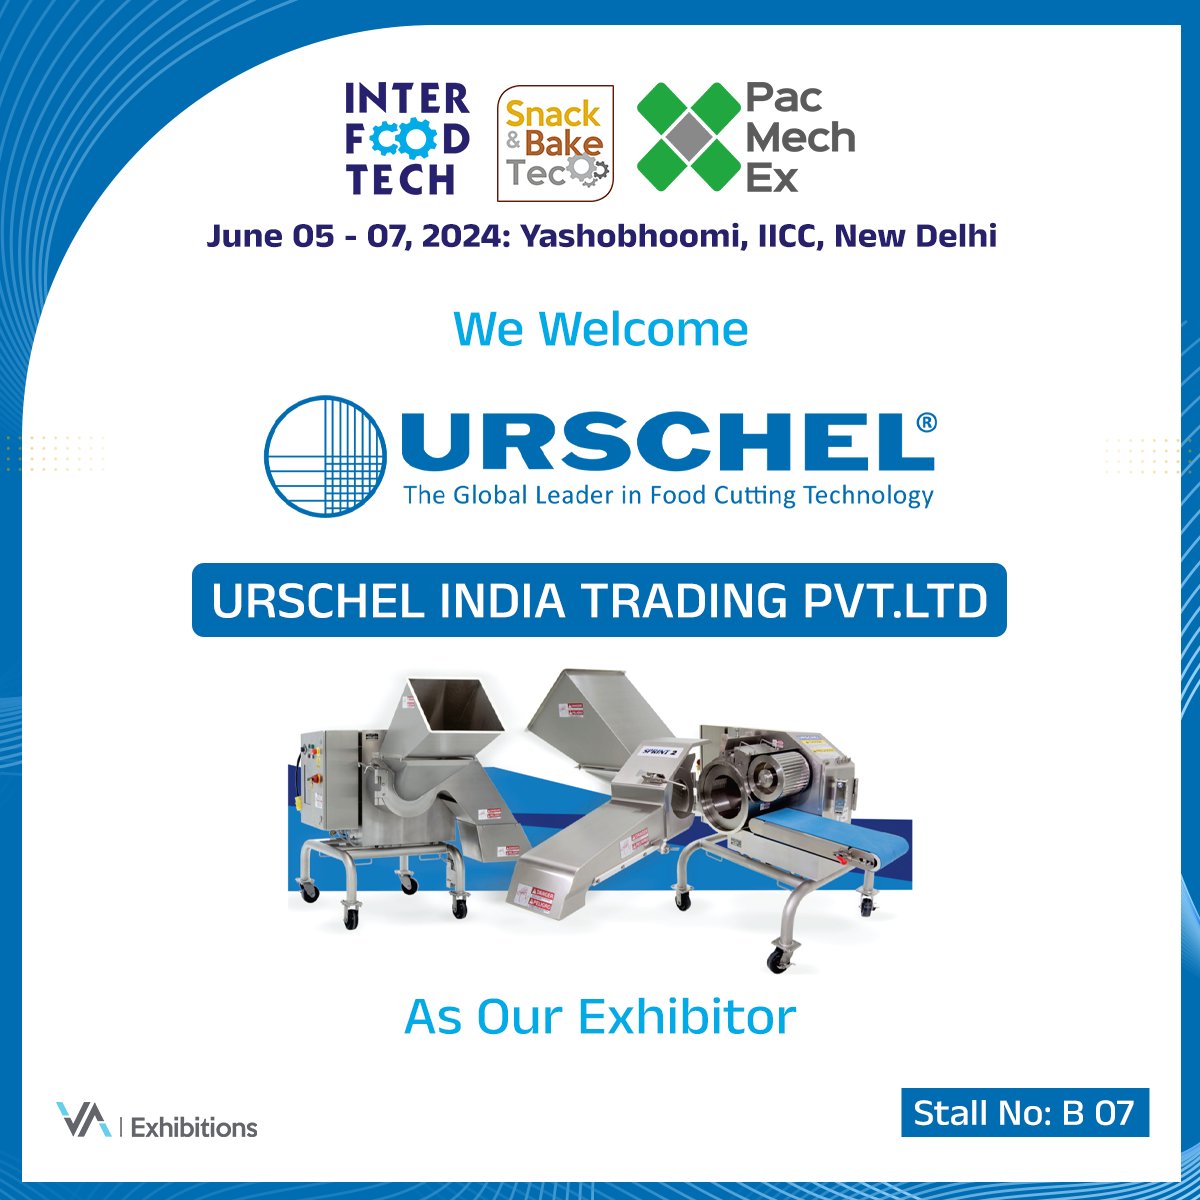 We welcome #Urschel INDIA as our esteemed exhibitor. 

URSCHEL is at the forefront of the food processing industry, known for their precision cutting equipment.

#Interfoodtech2024  #FoodProcessingInnovation #PrecisionCuttingEquipment #CuttingEdgeMachinery #FoodTechExpo